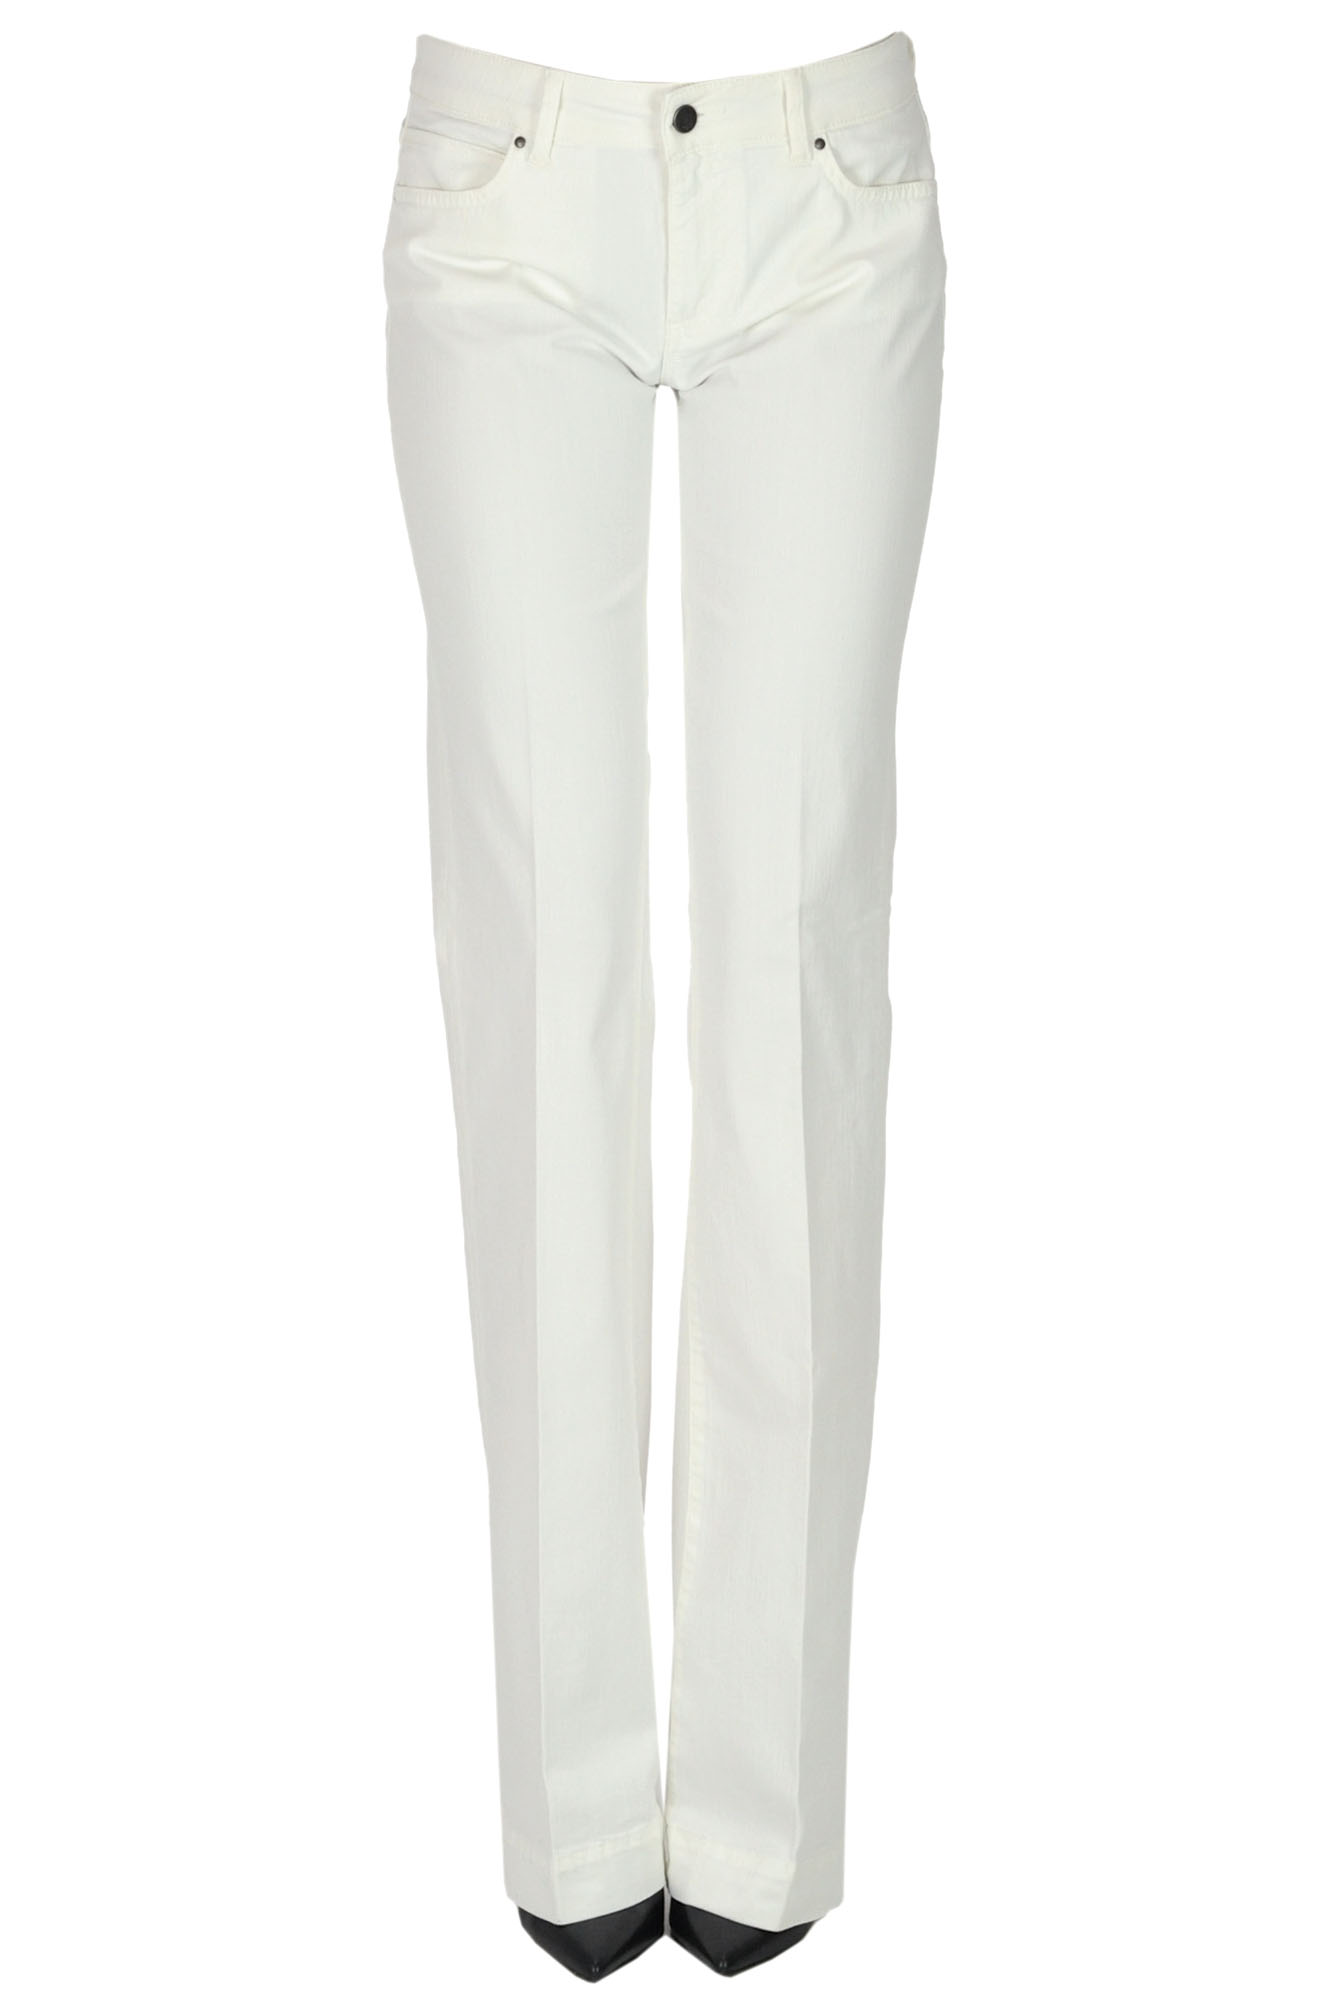 Atelier Cigala's Cotton Trousers In White